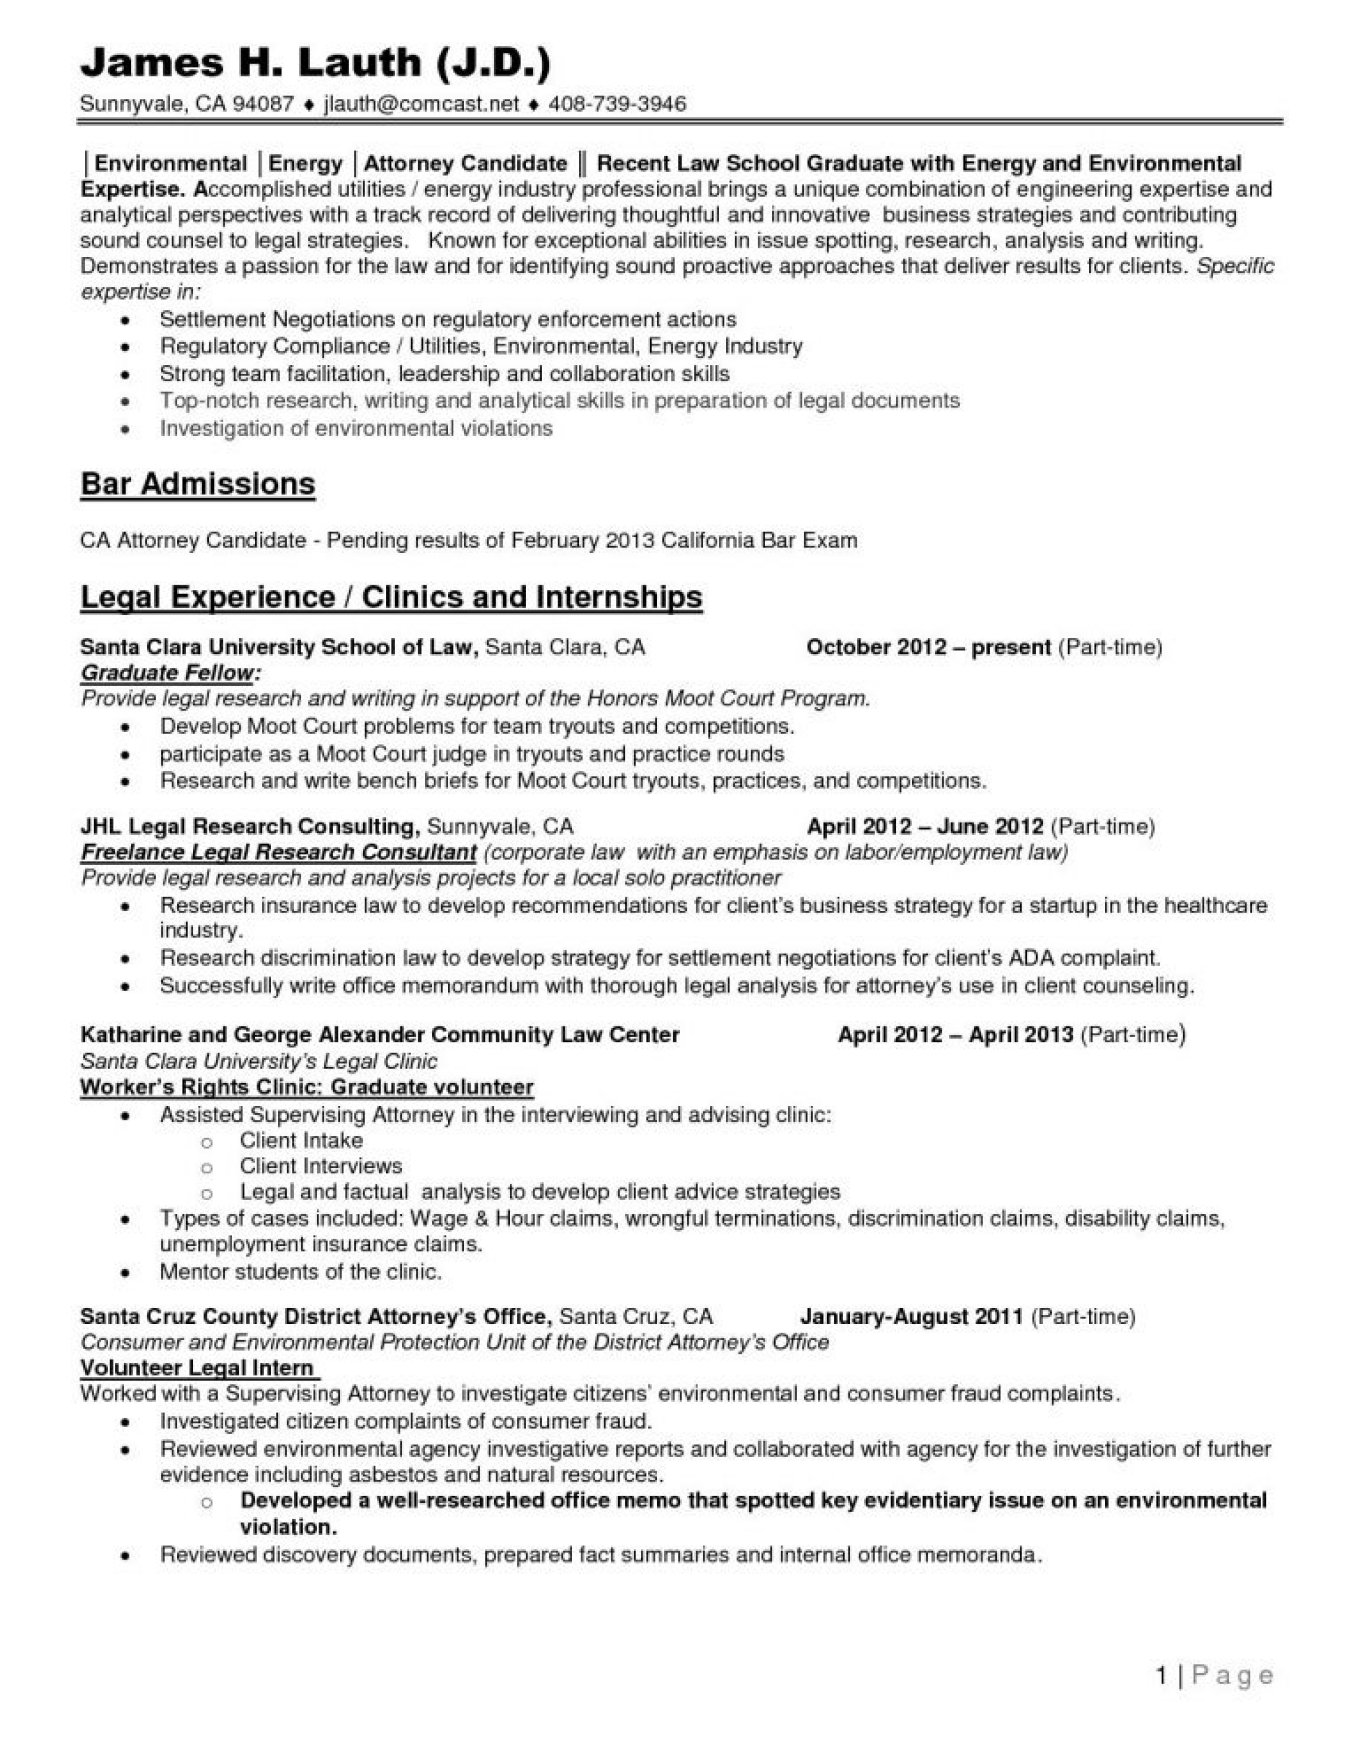 resume format for law school